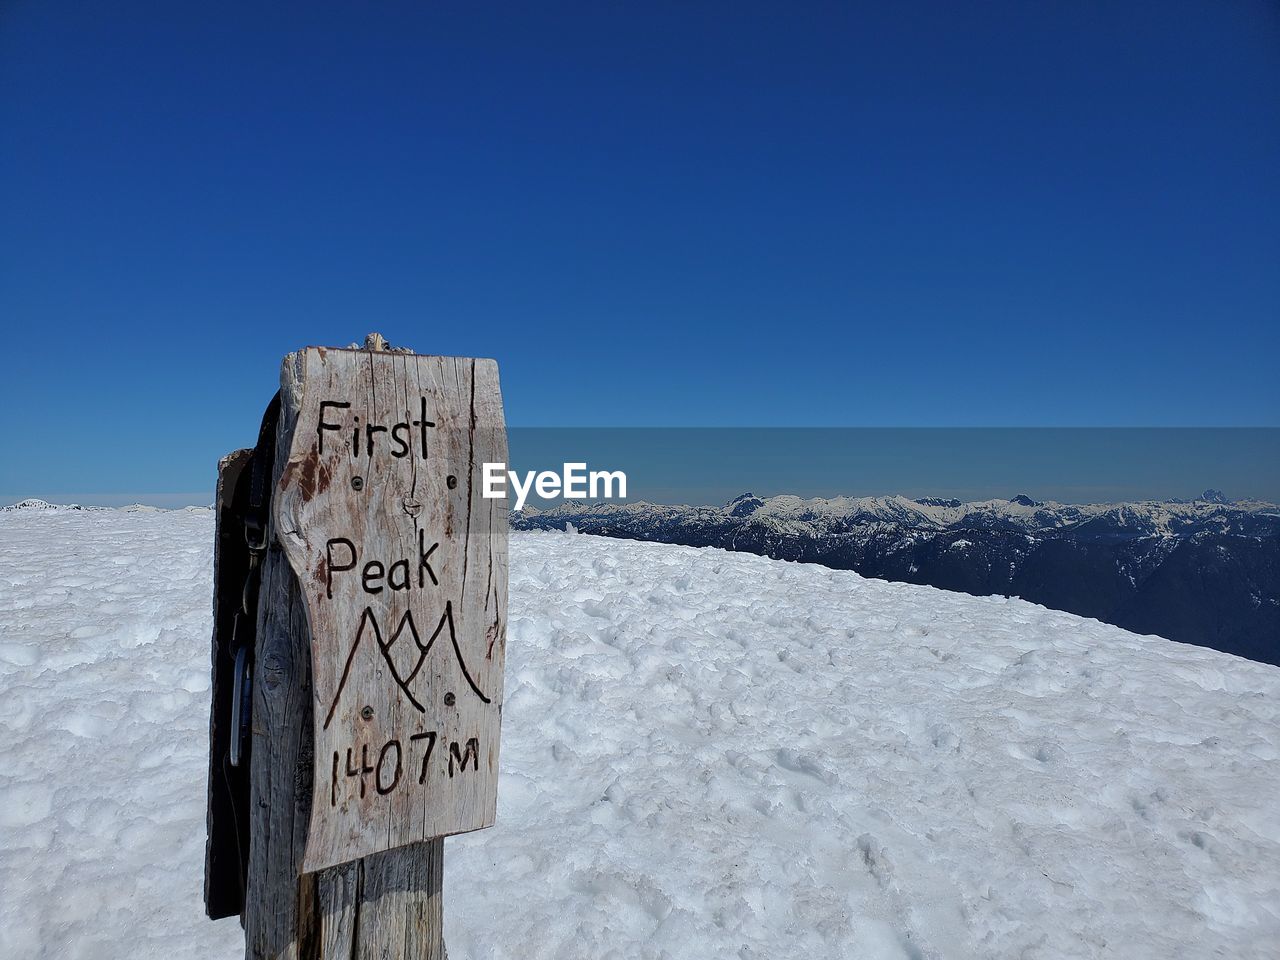 Mountain peak sign with text on snow covered landscape against blue sky